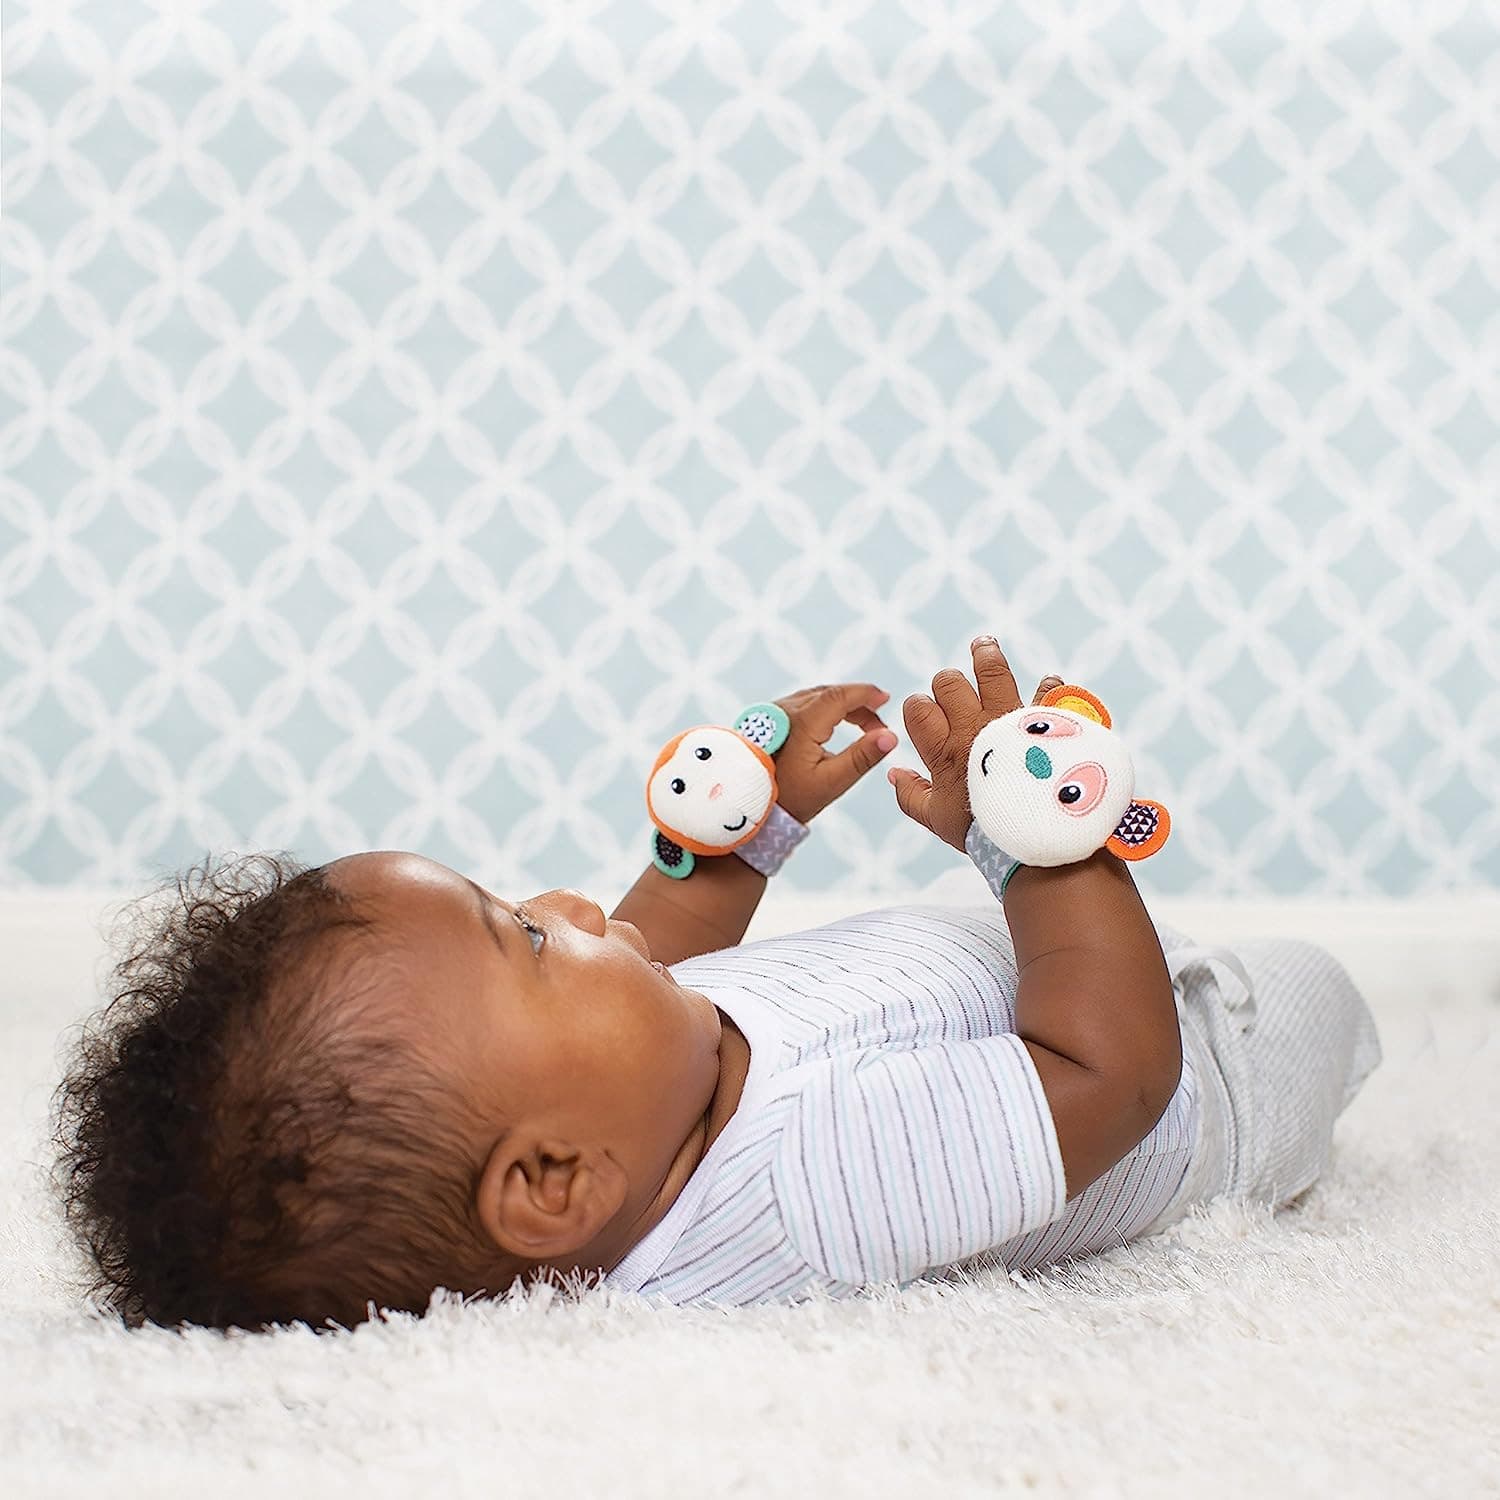 Infantino Baby Wrist Rattles, Monkey and Panda-Themed, 1-Piece Set for Babies 0M+.